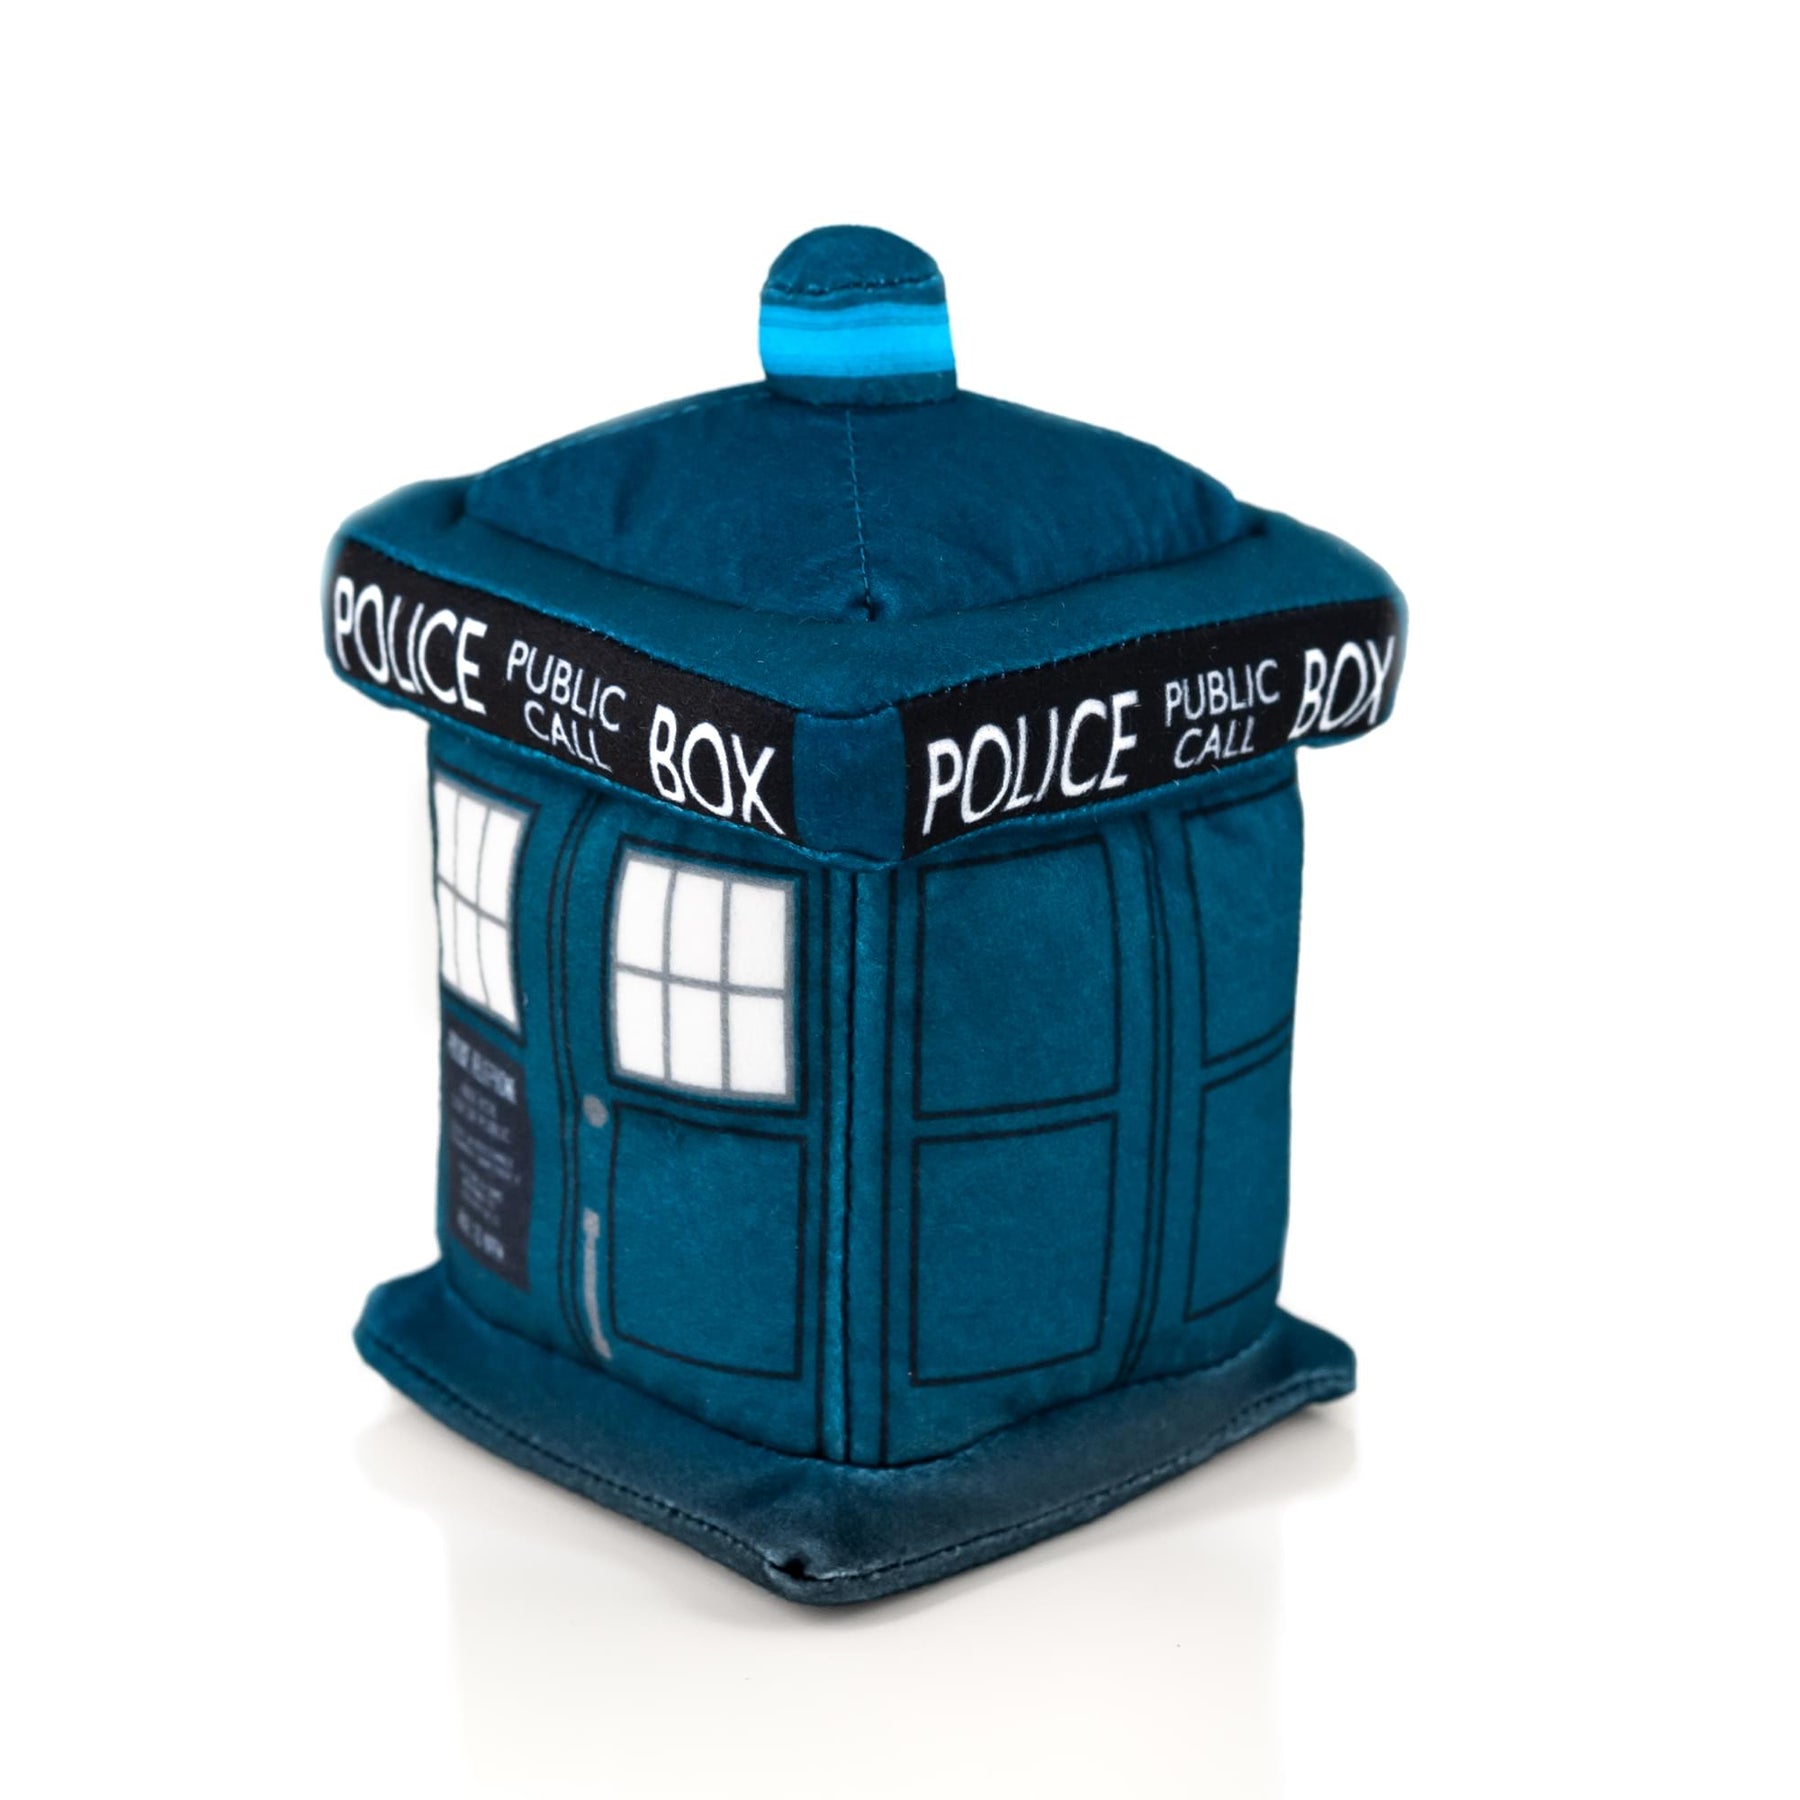 Doctor Who 4.5-Inch Plush TARDIS and 13th Doctor Enamel Collector Pin